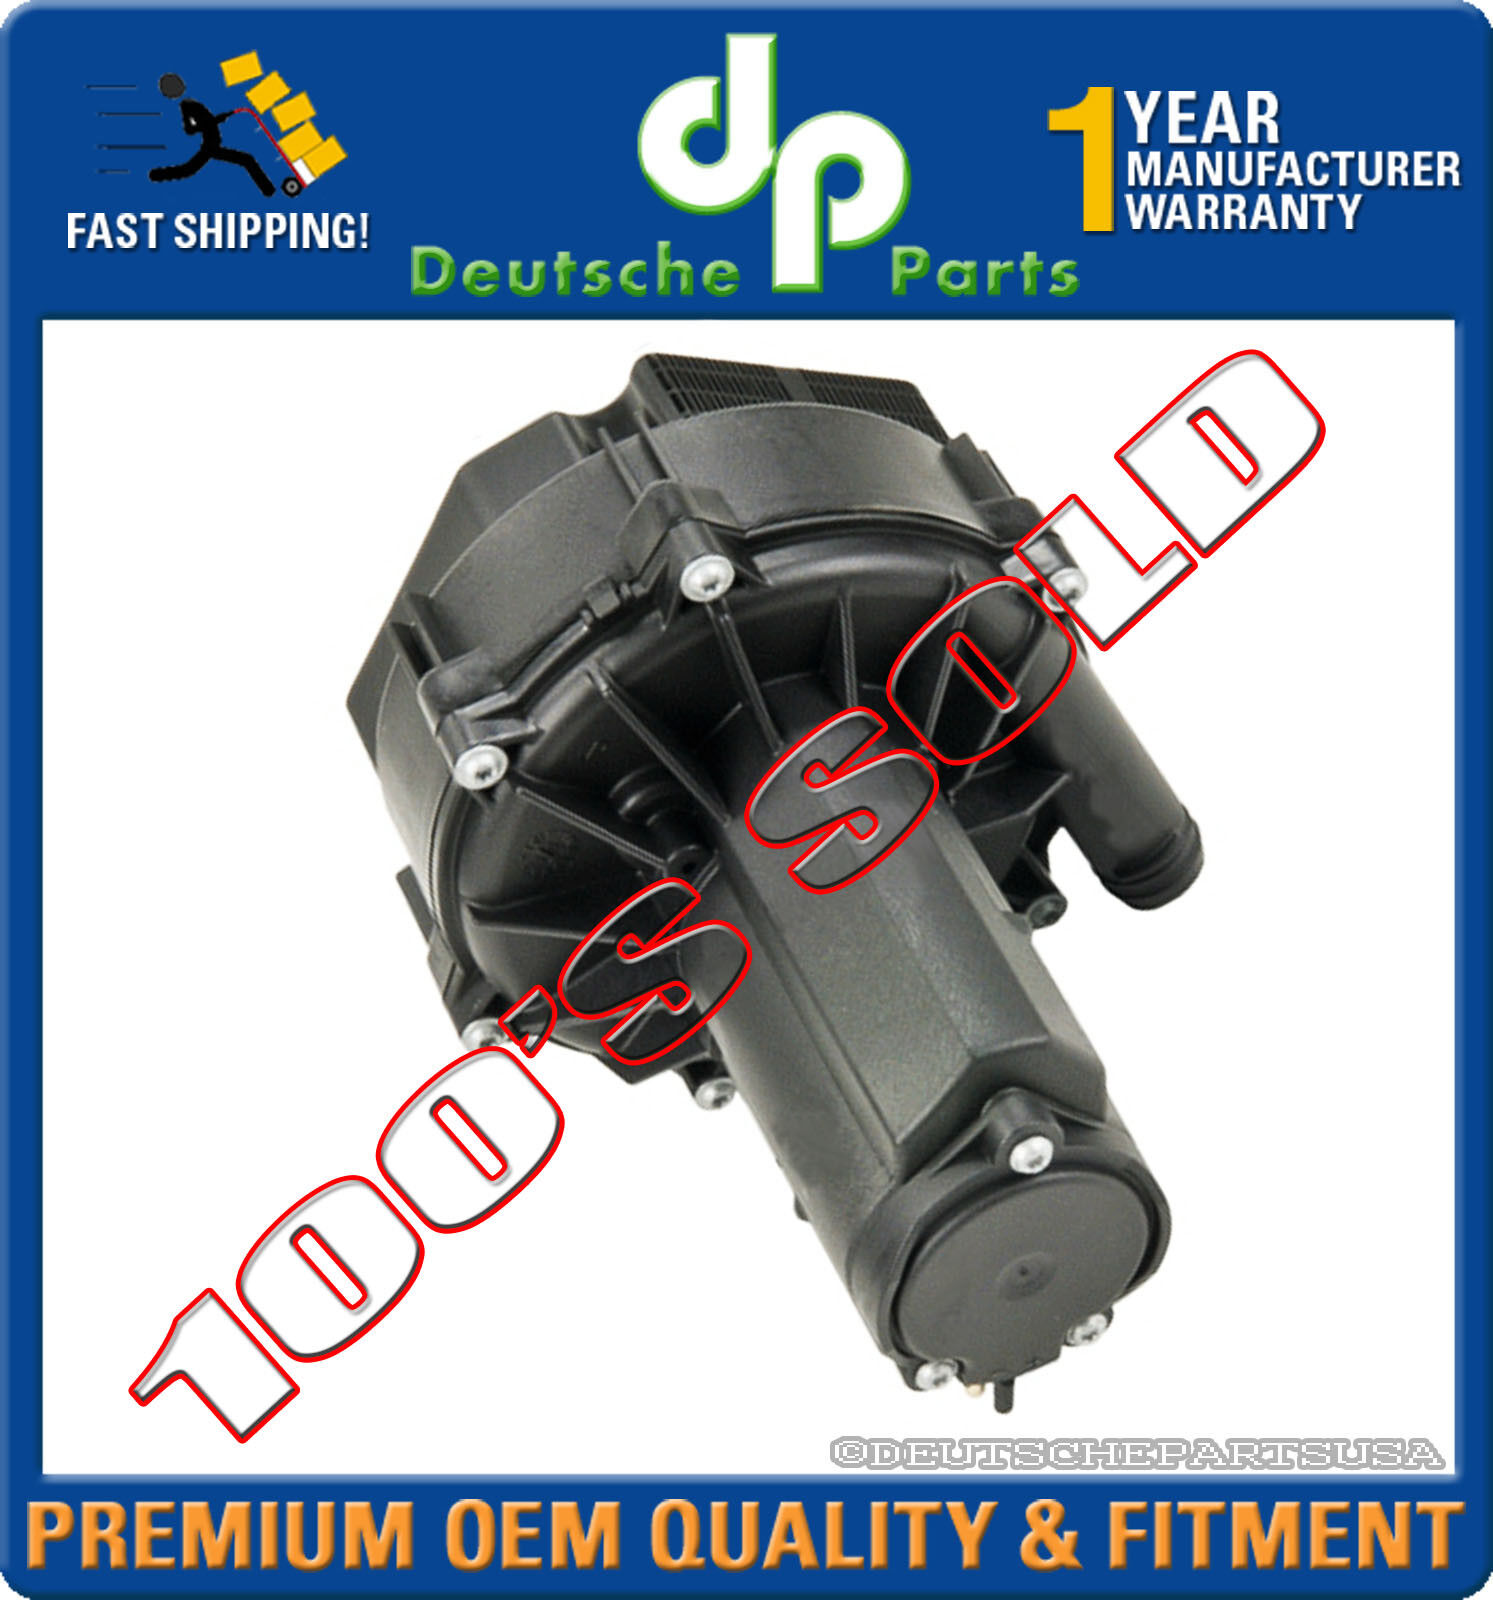 CHRYSLER CROSSFIRE Secondary Smog Air Pump / Emission Control 5098830AA 